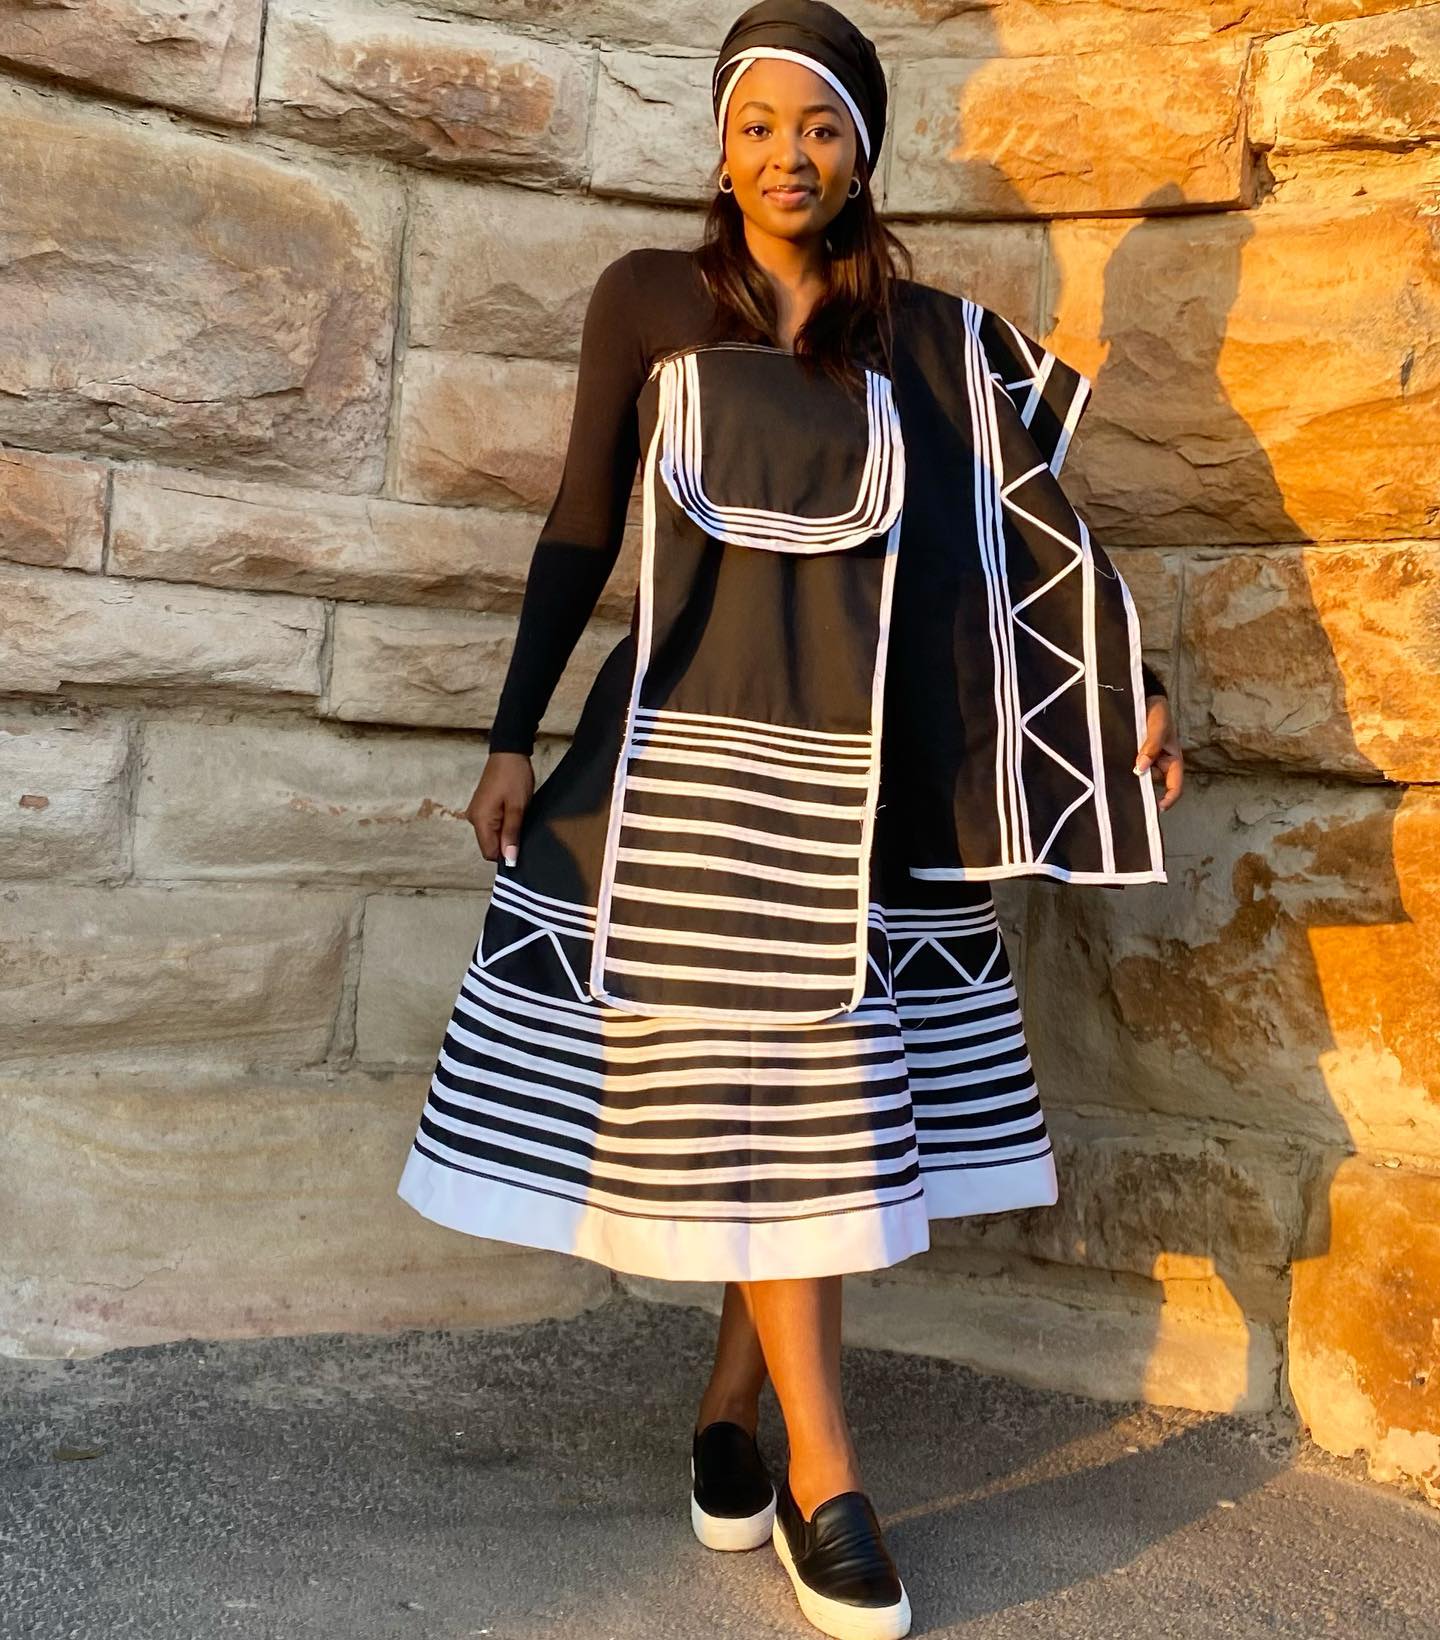 Exquisite Expressions: Xhosa Dresses Reflecting 2024 Design Trends